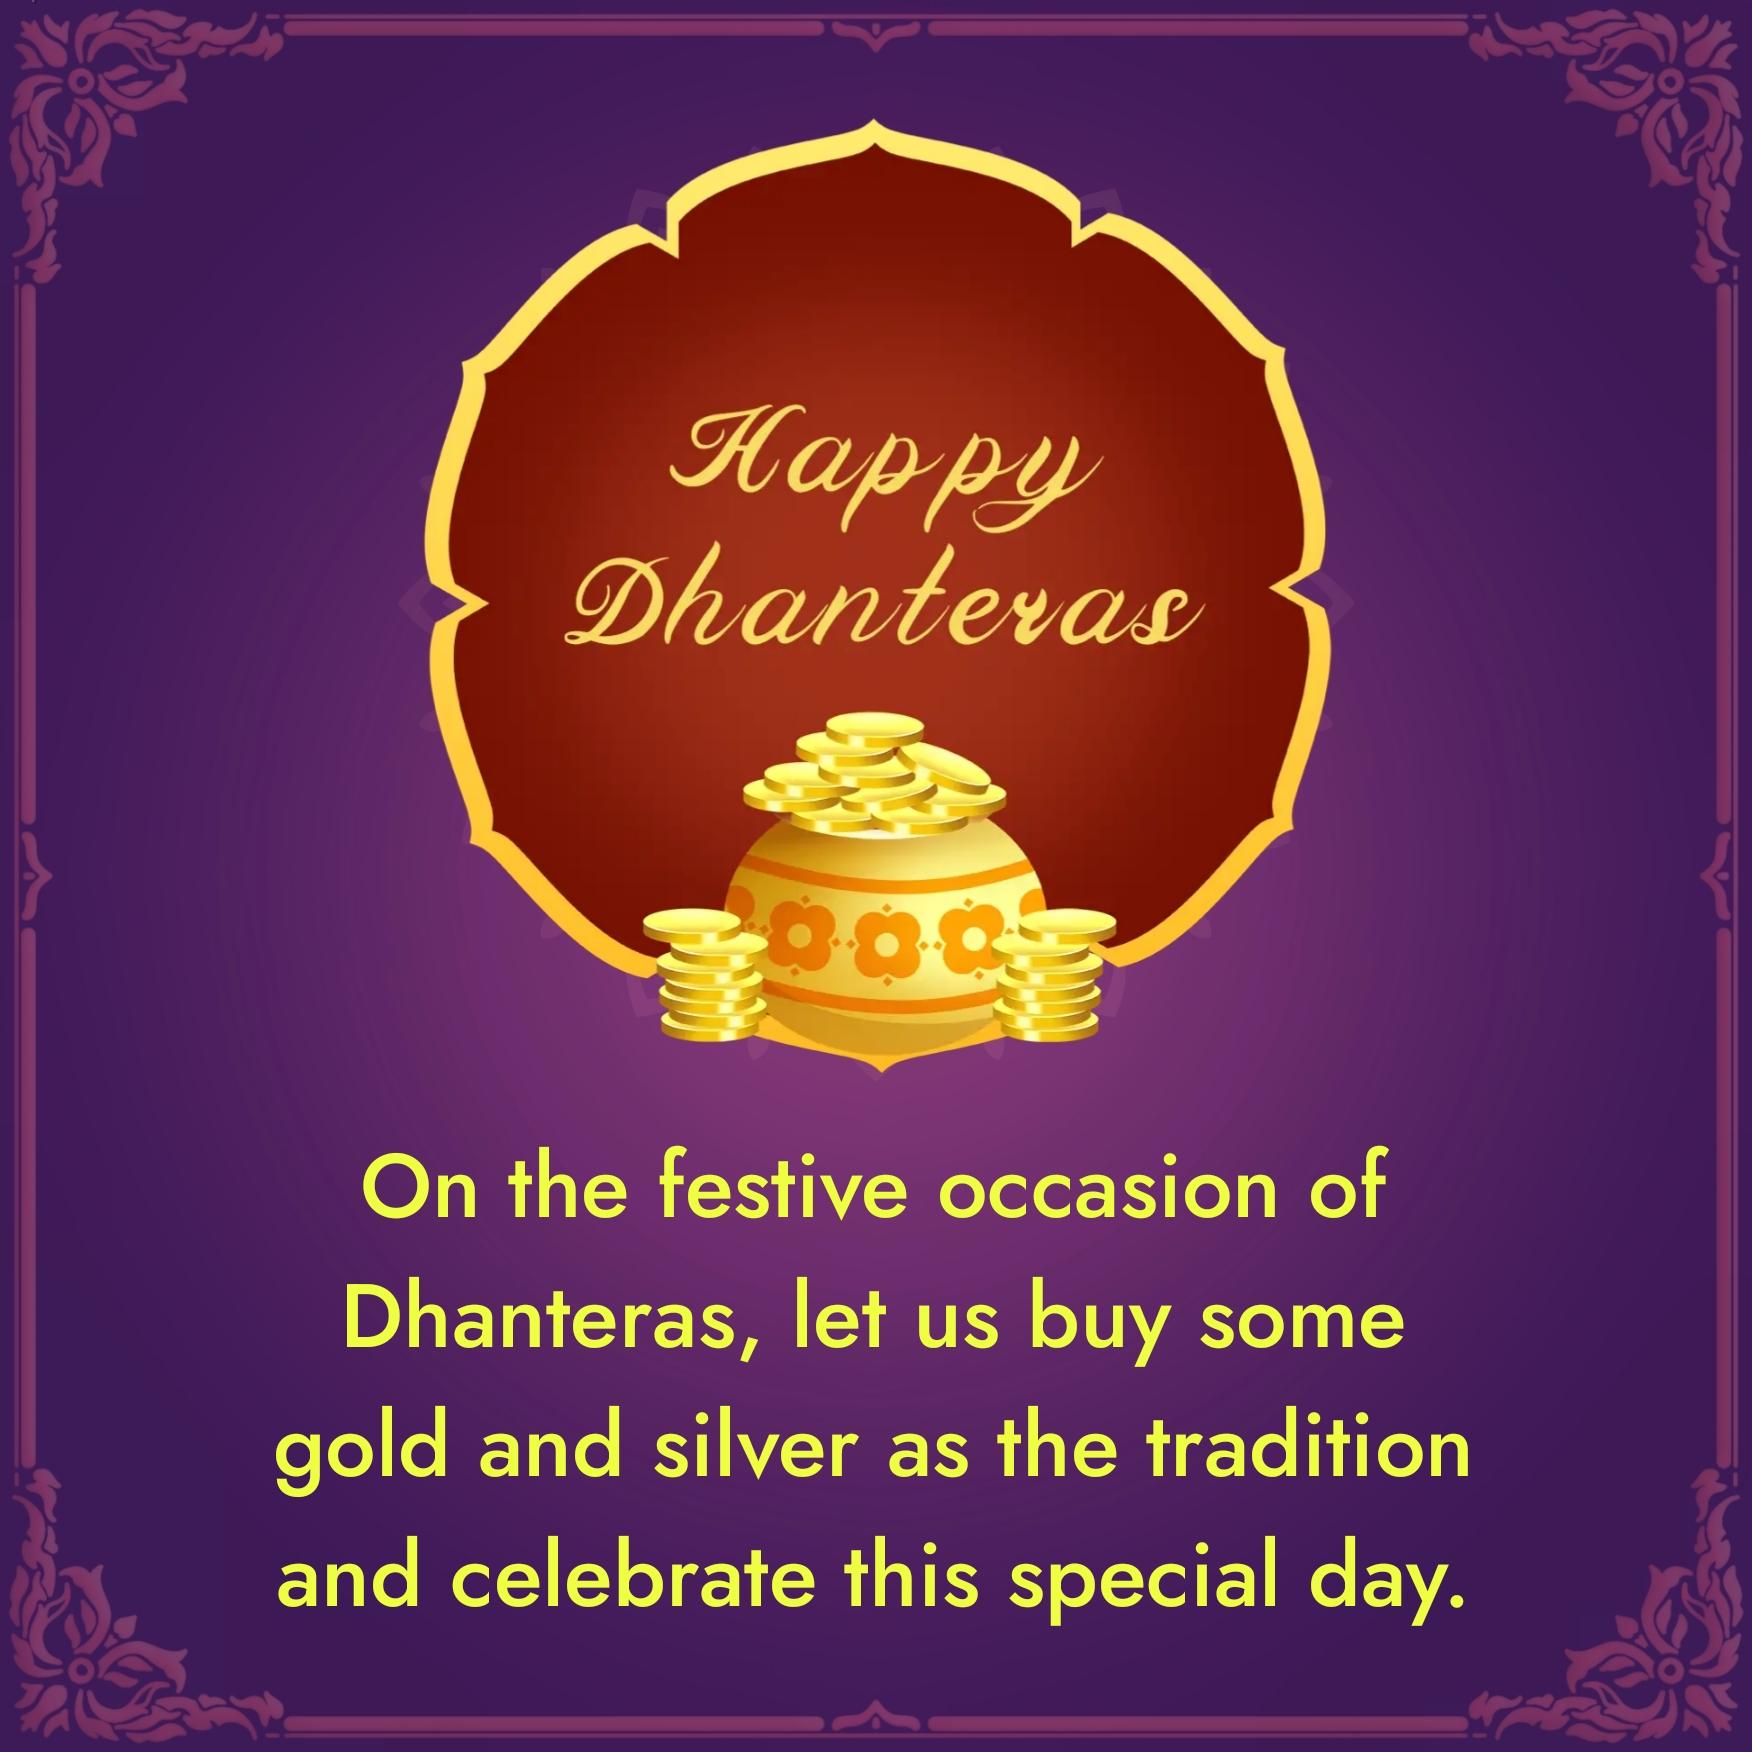 On the festive occasion of Dhanteras let us buy